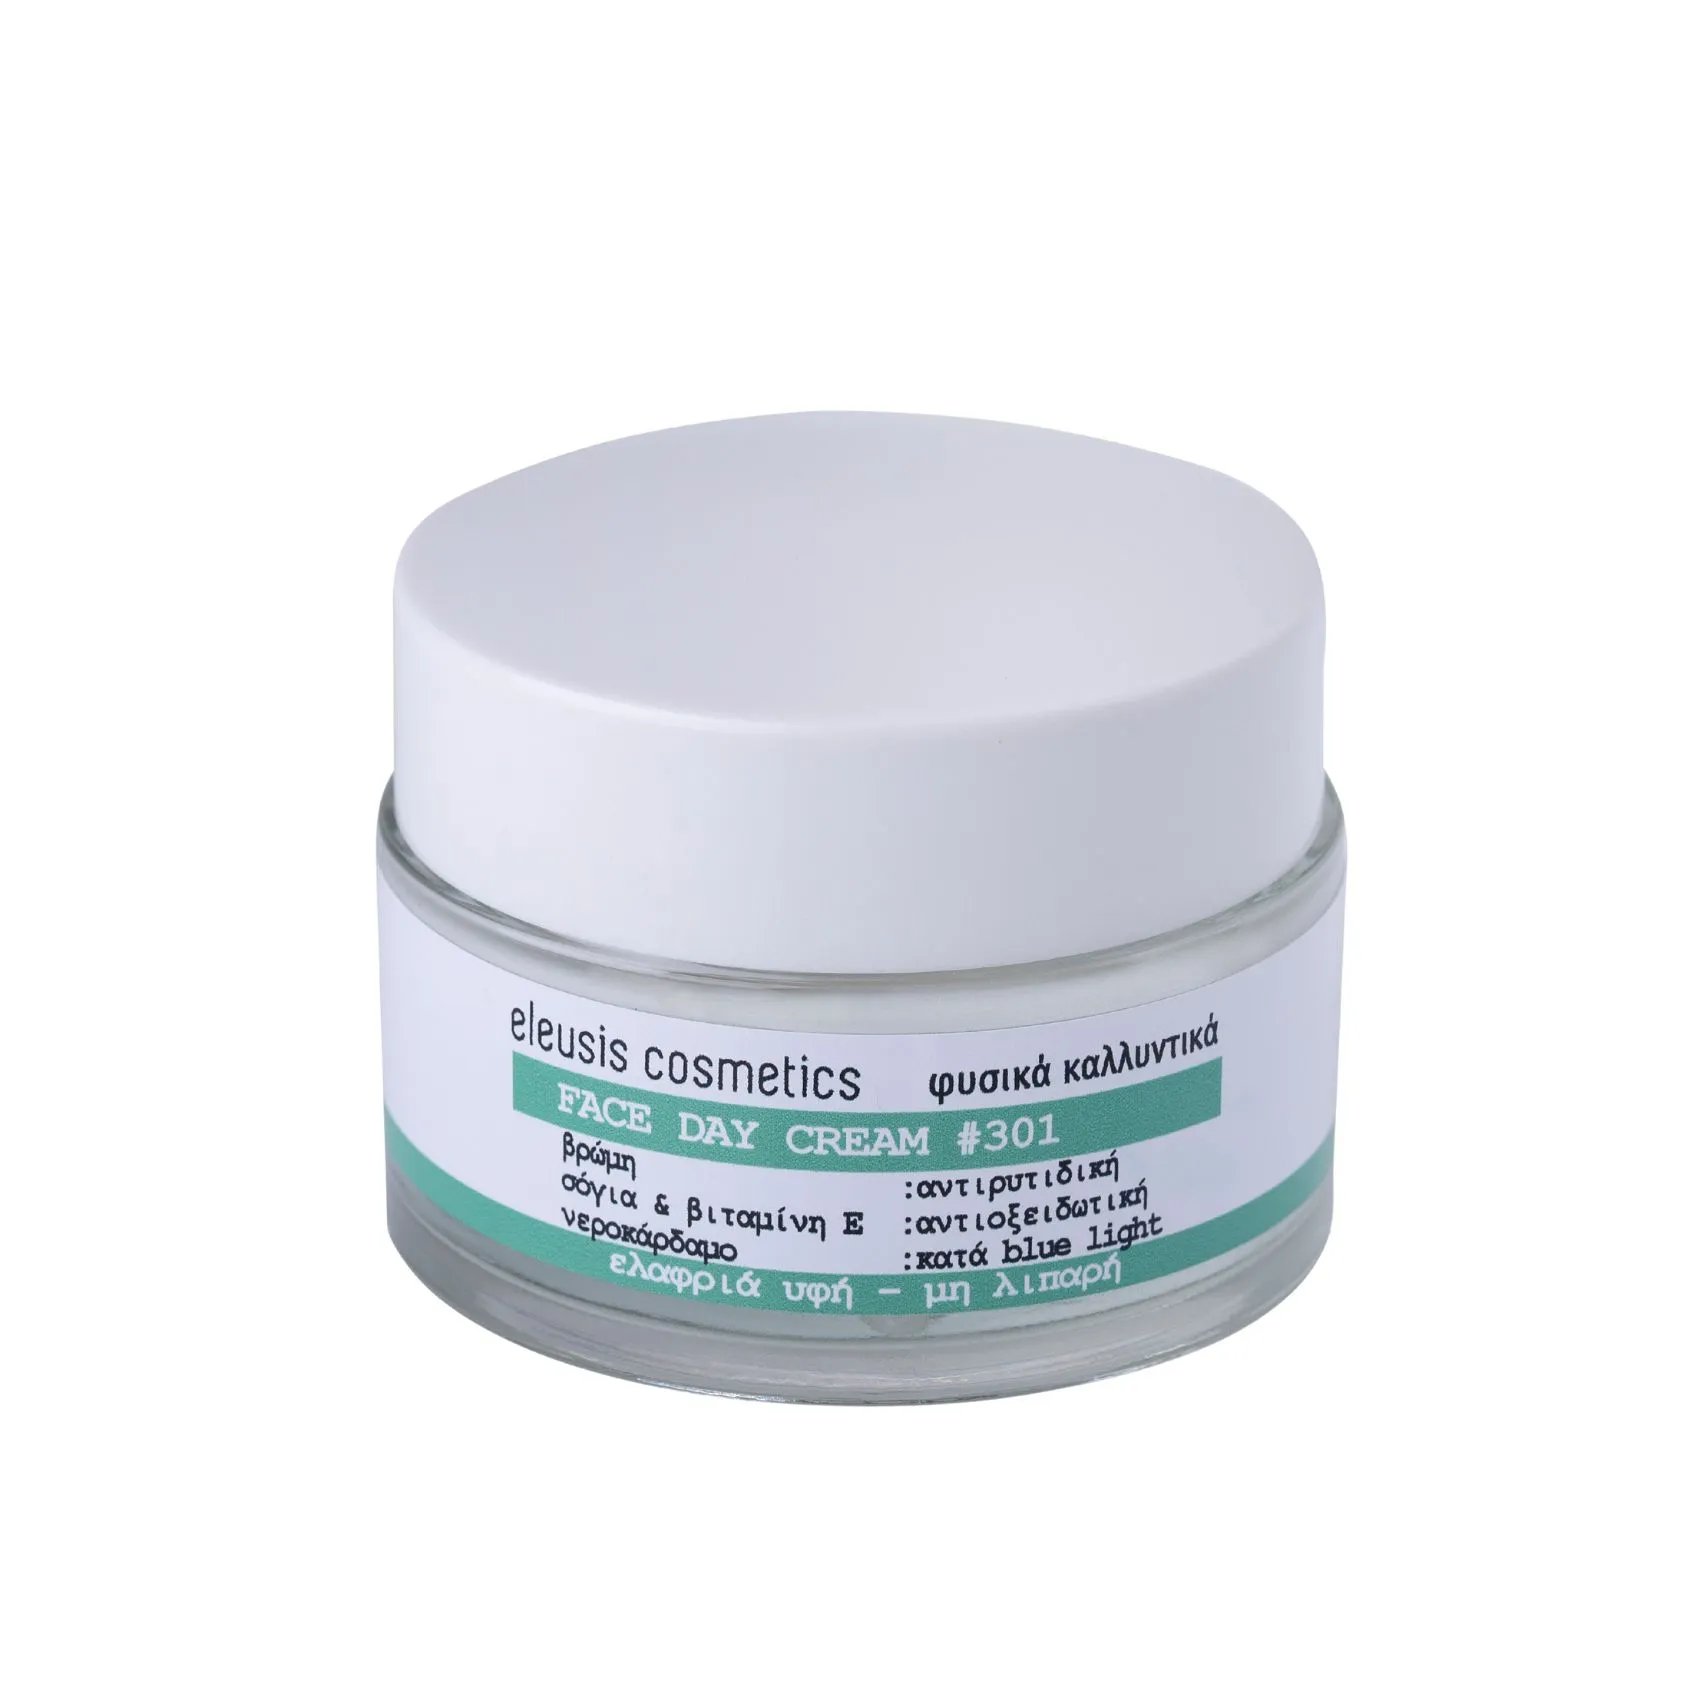 image of Face Day cream #301 Anti-Wrinkle